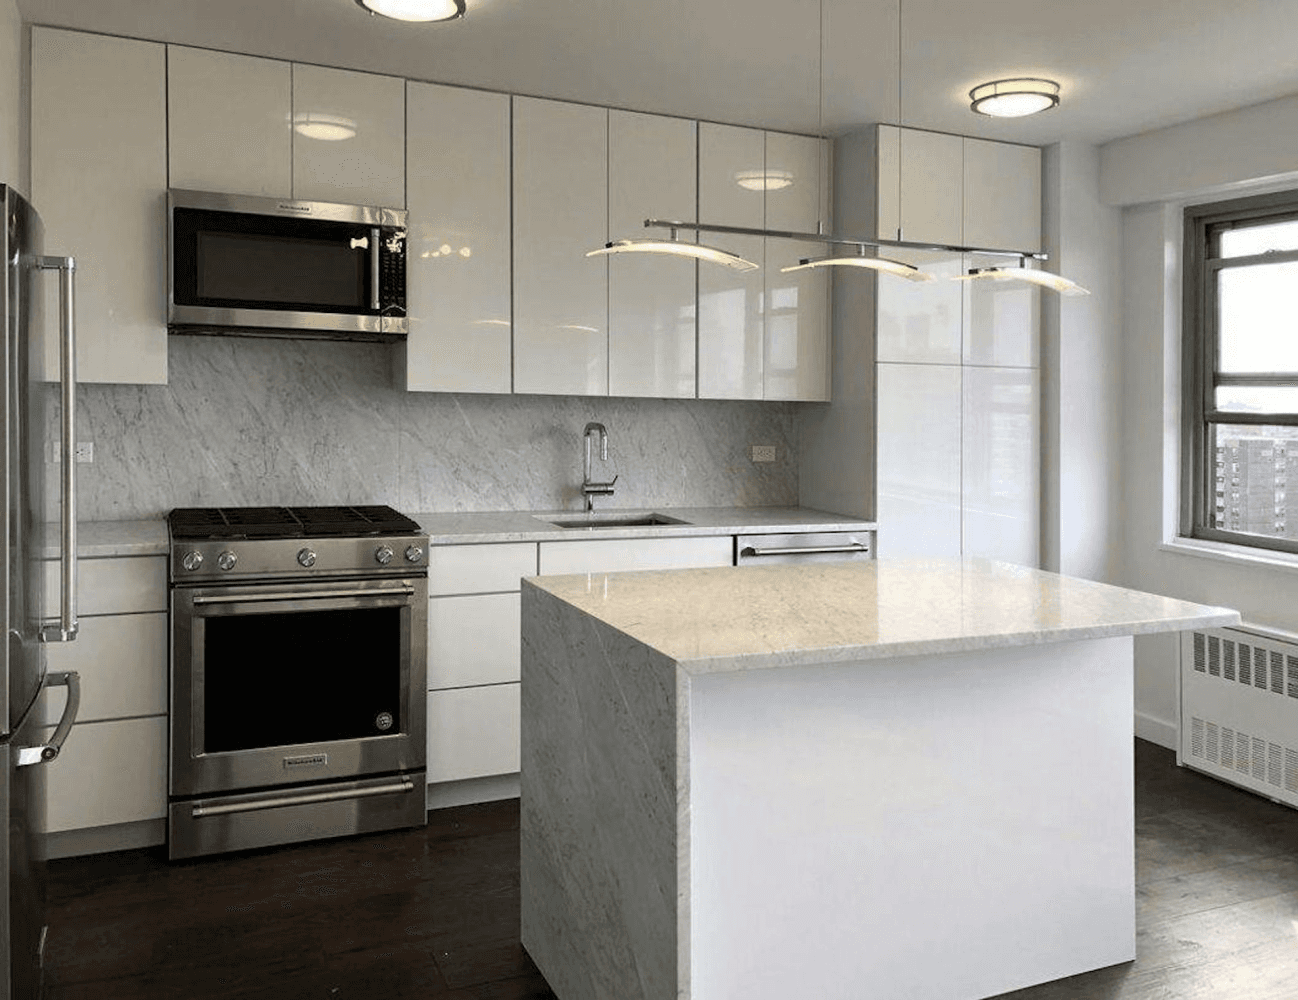 This Beautiful Apartment is located on the corner of 93rd and Columbus, this full service luxury building features a fitness center, on site parking garage, landscaped terrace deck, playroom, laundry ...